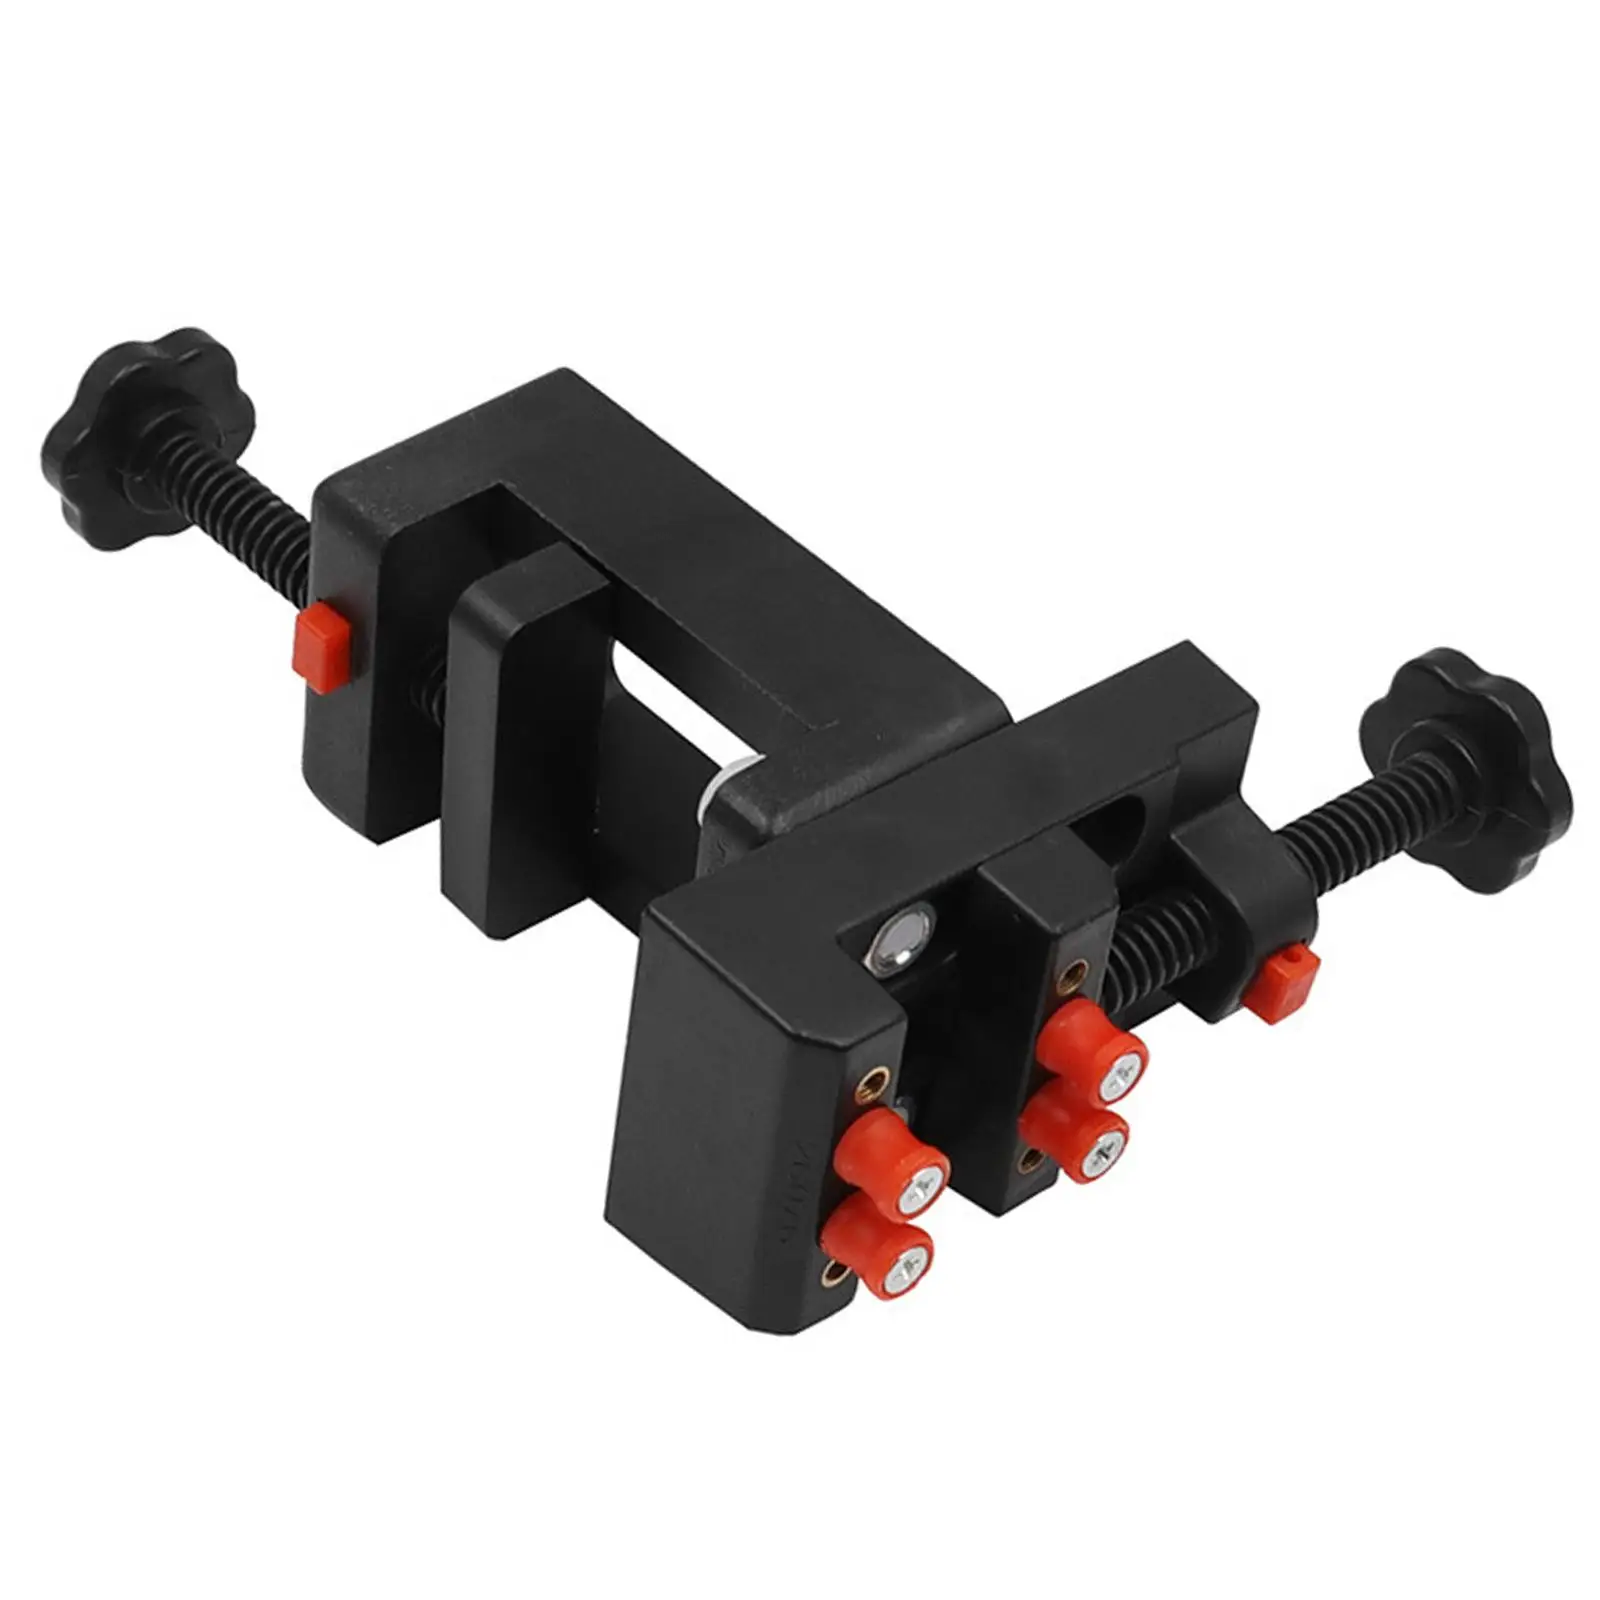 Universal Tabletop Clamp Vice Woodworking Clamps Model Making Vise Table Tool Vise for Woodworking Home DIY Model Sawing Craft